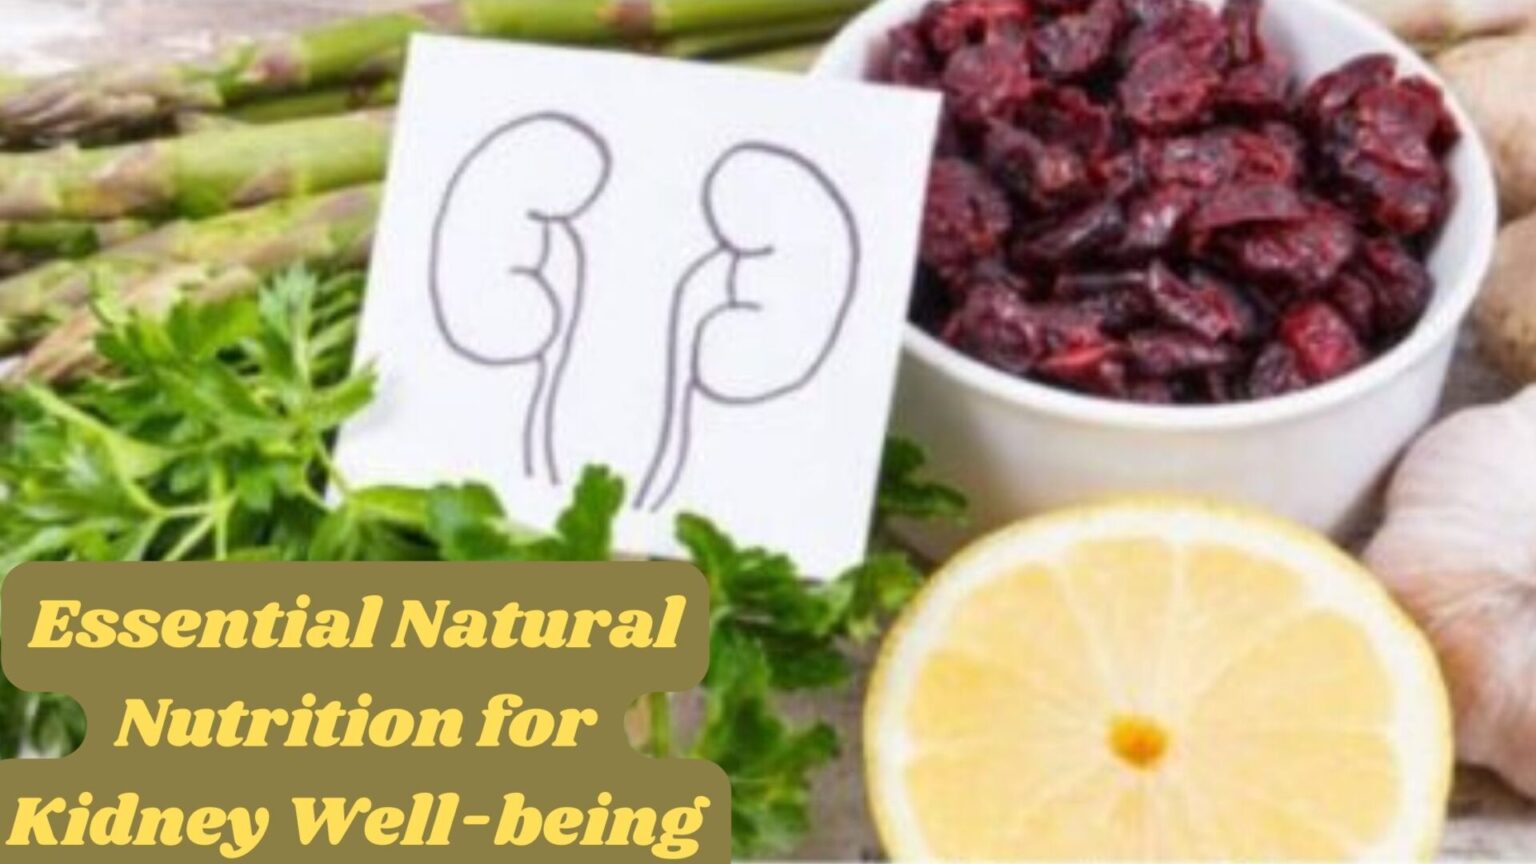 Essential Natural Nutrition for Kidney Well-being